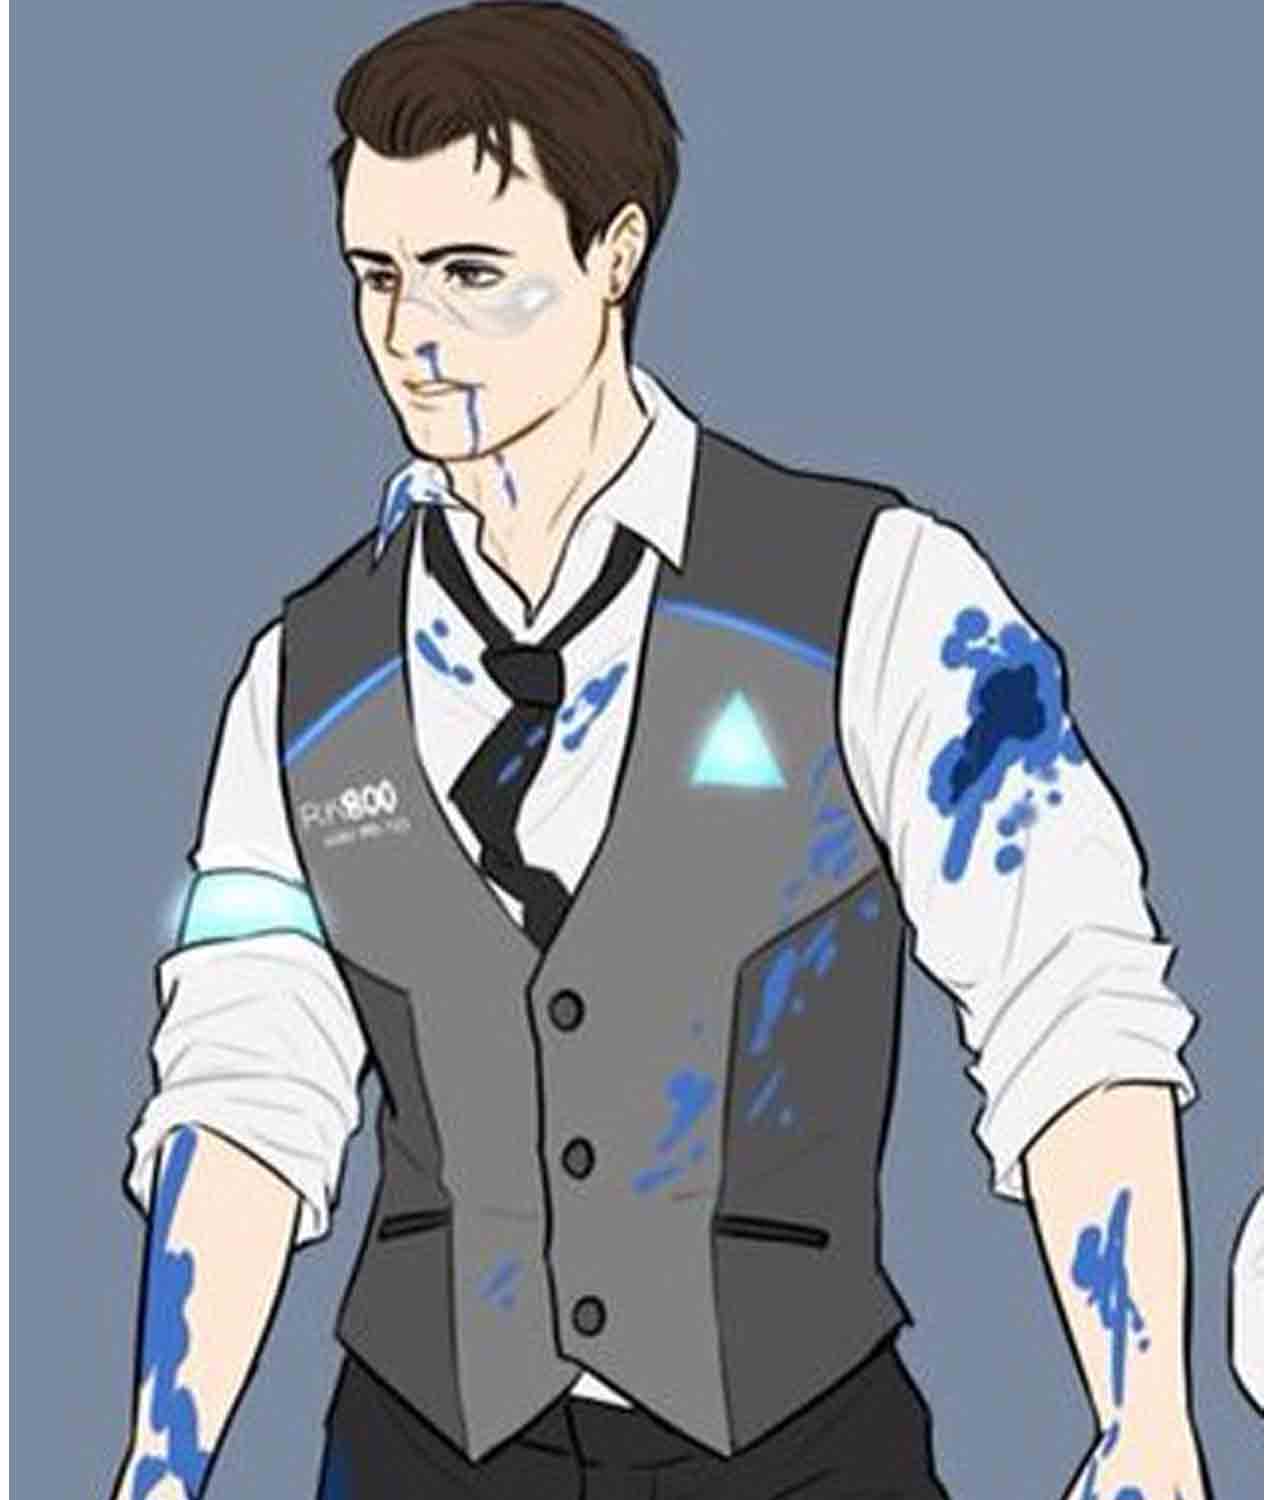 Detroit Become Human RK200 Markus Coat, Video Game Outfit